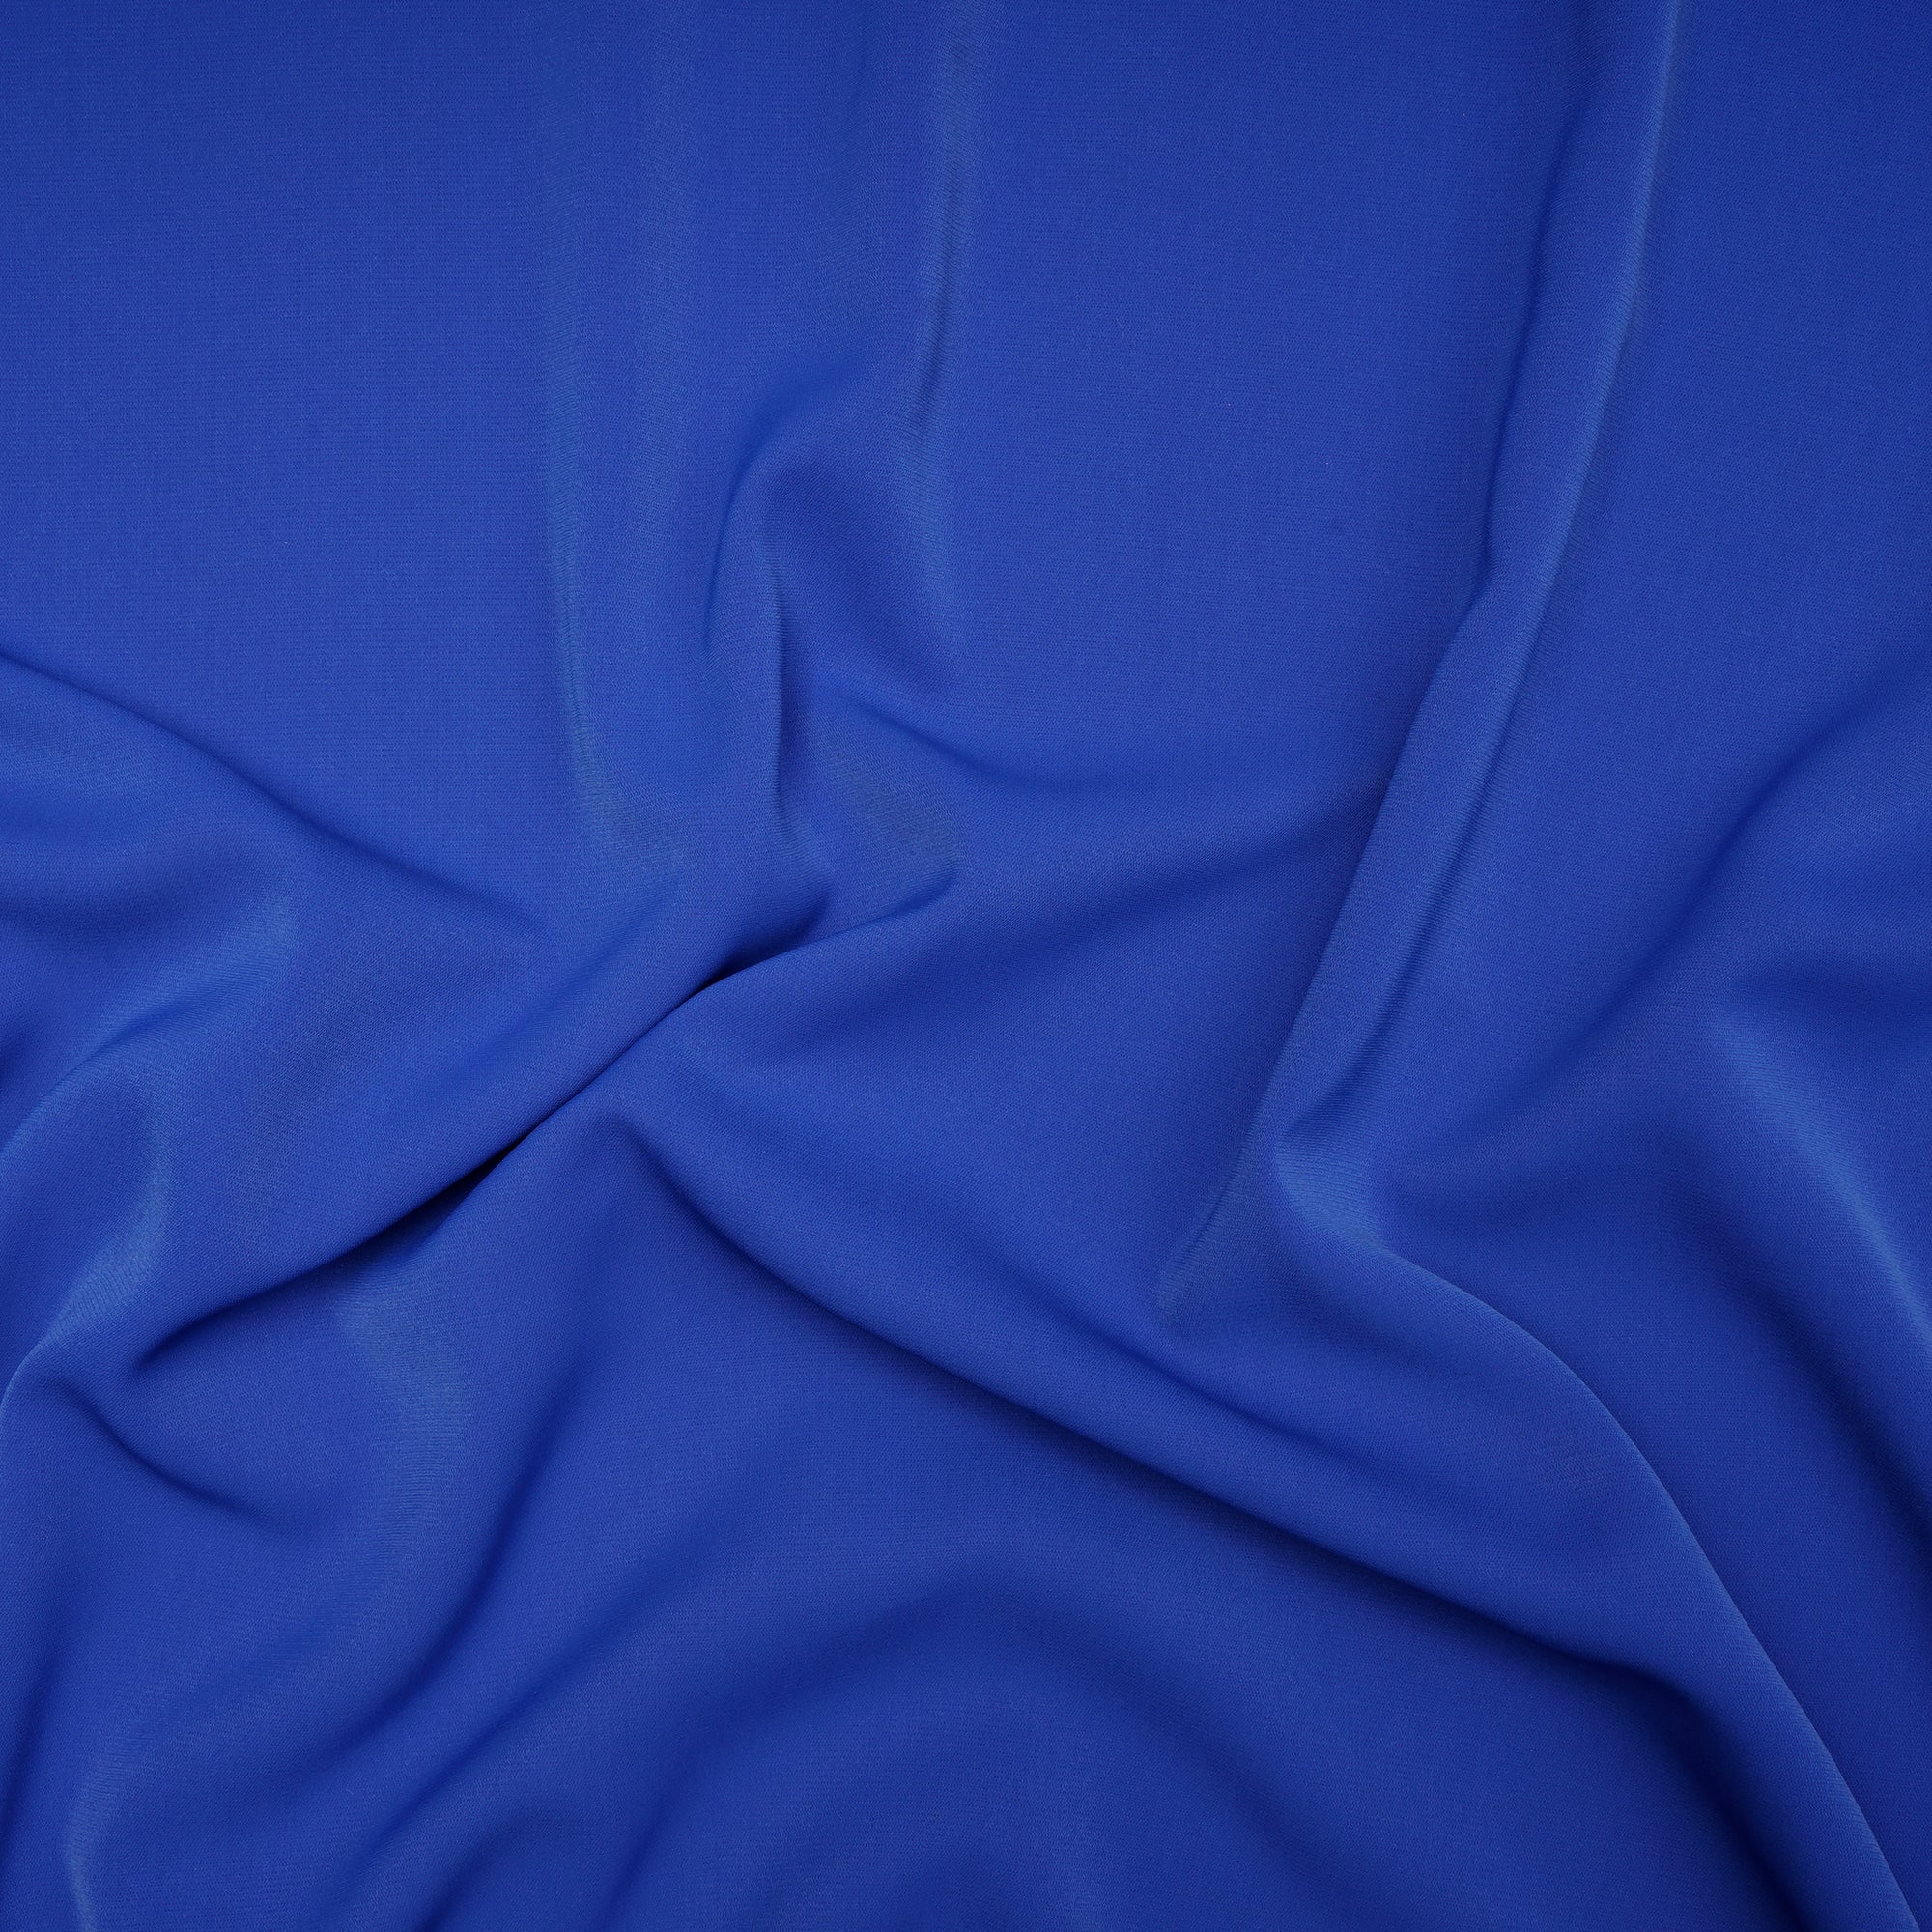 Victoria Blue Solid Dyed Imported Angela Crepe Fabric (60" Width)